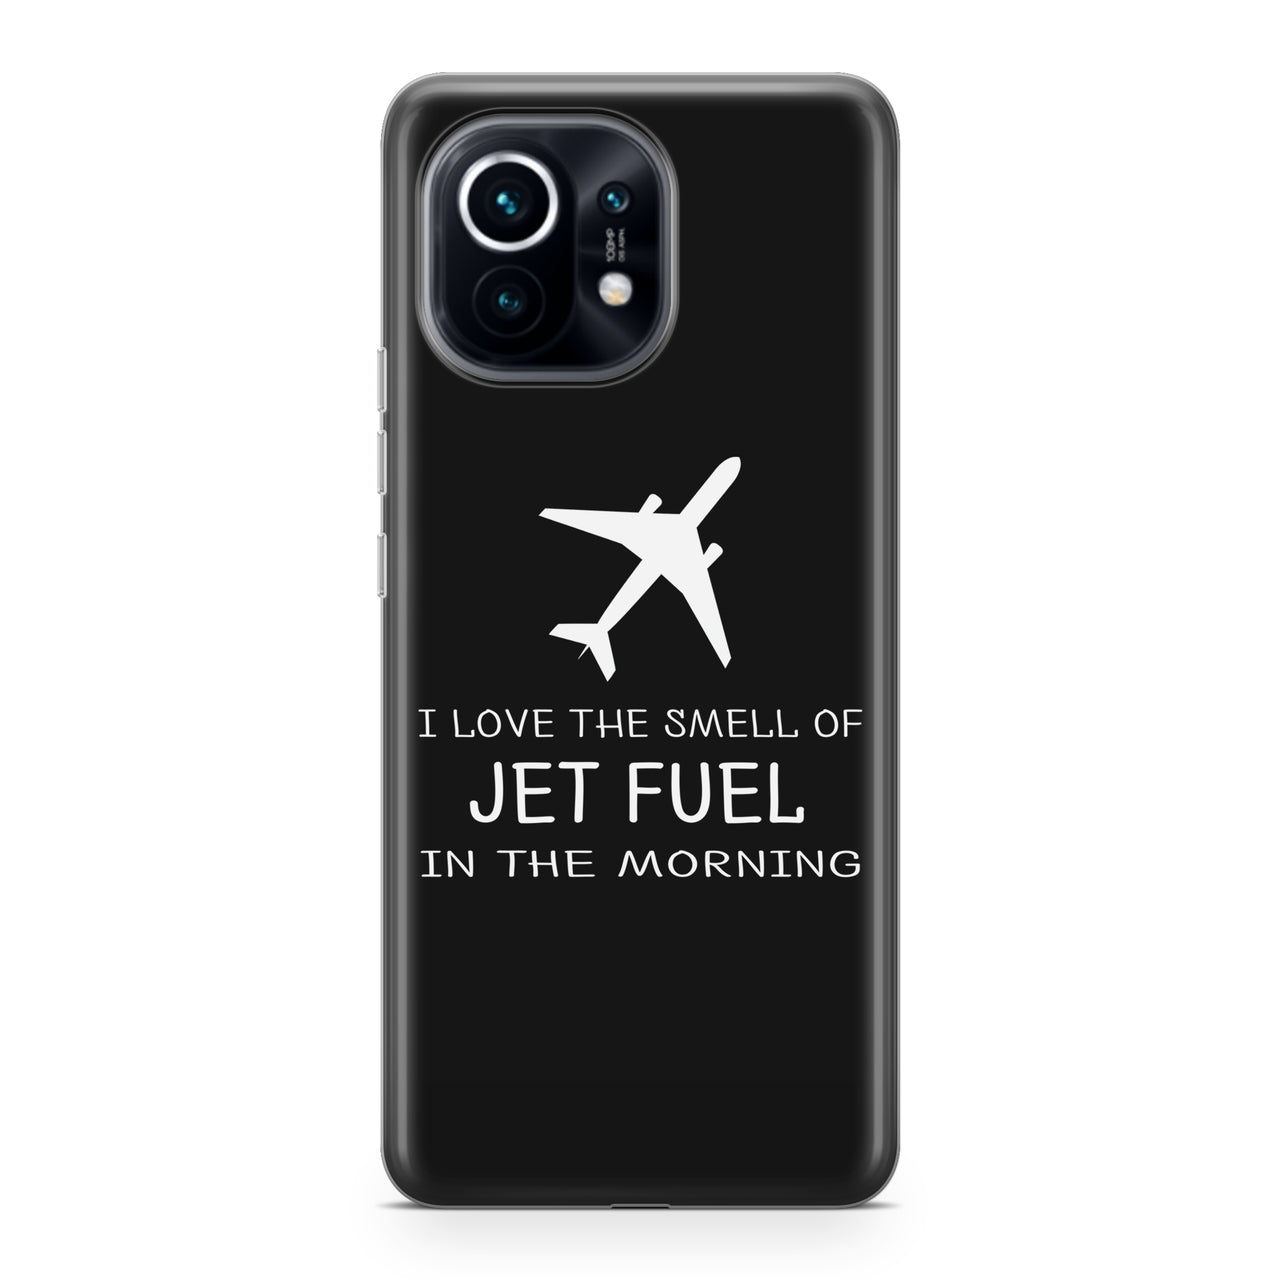 I Love The Smell Of Jet Fuel In The Morning Designed Xiaomi Cases